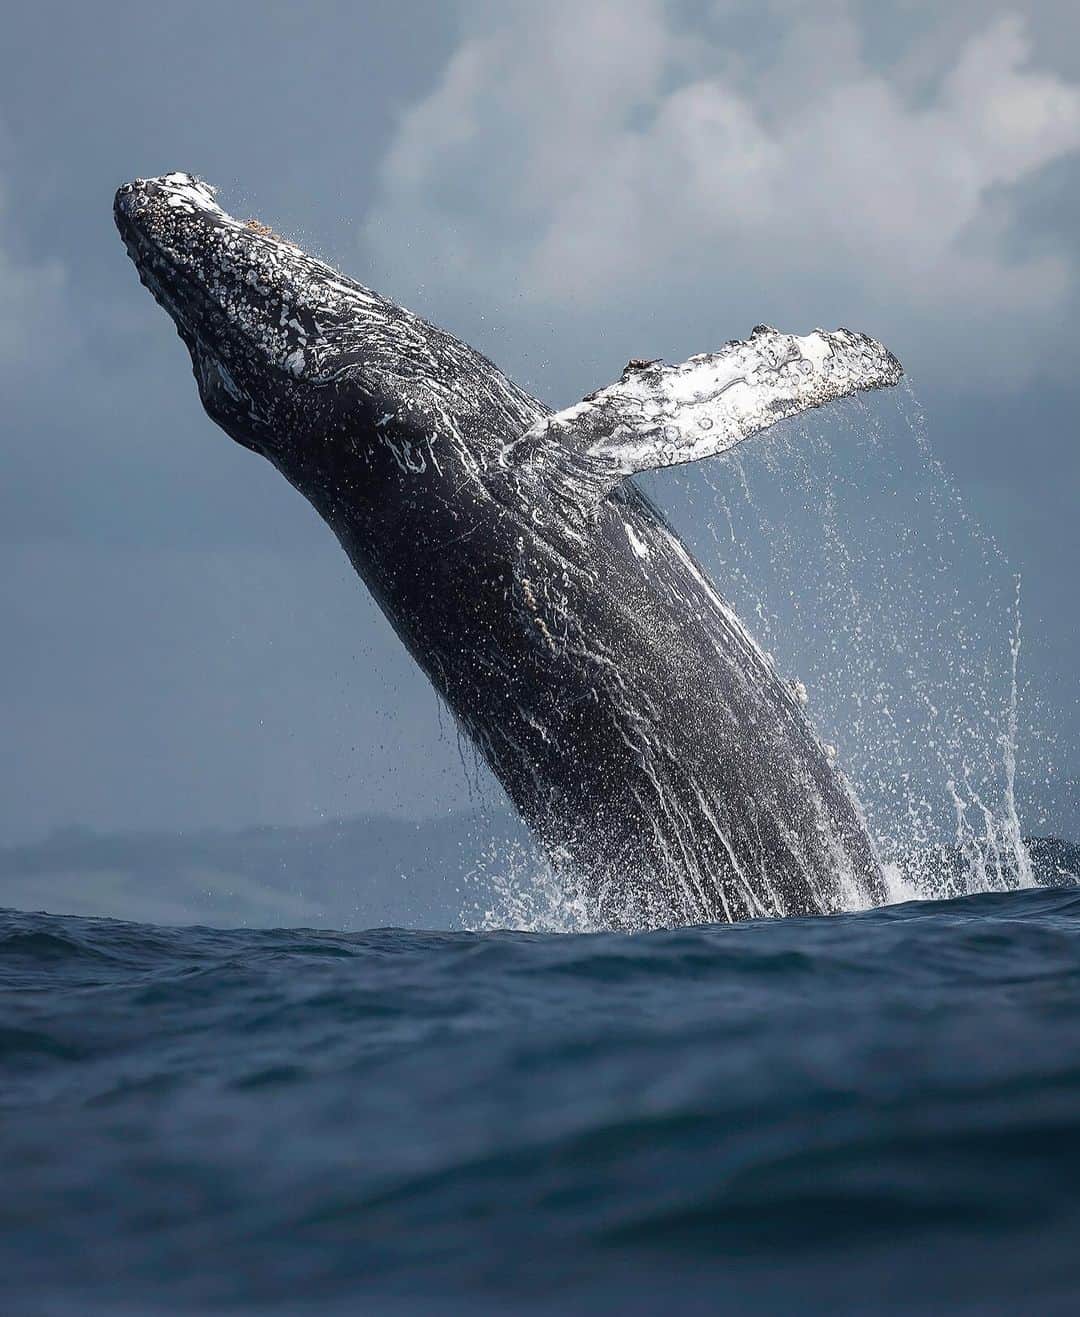 Chase Dekker Wild-Life Imagesのインスタグラム：「The humpback breaching season is getting closer and closer. I love the gray whale migration along the coast, but there’s no denying that they don’t put on a show like the humpbacks. The last few years, March has become a fantastic month for encountering both lunge-feeding and breaching humpbacks as they arrive back in Monterey Bay to replenish their fat reserves. Only a few more weeks!」